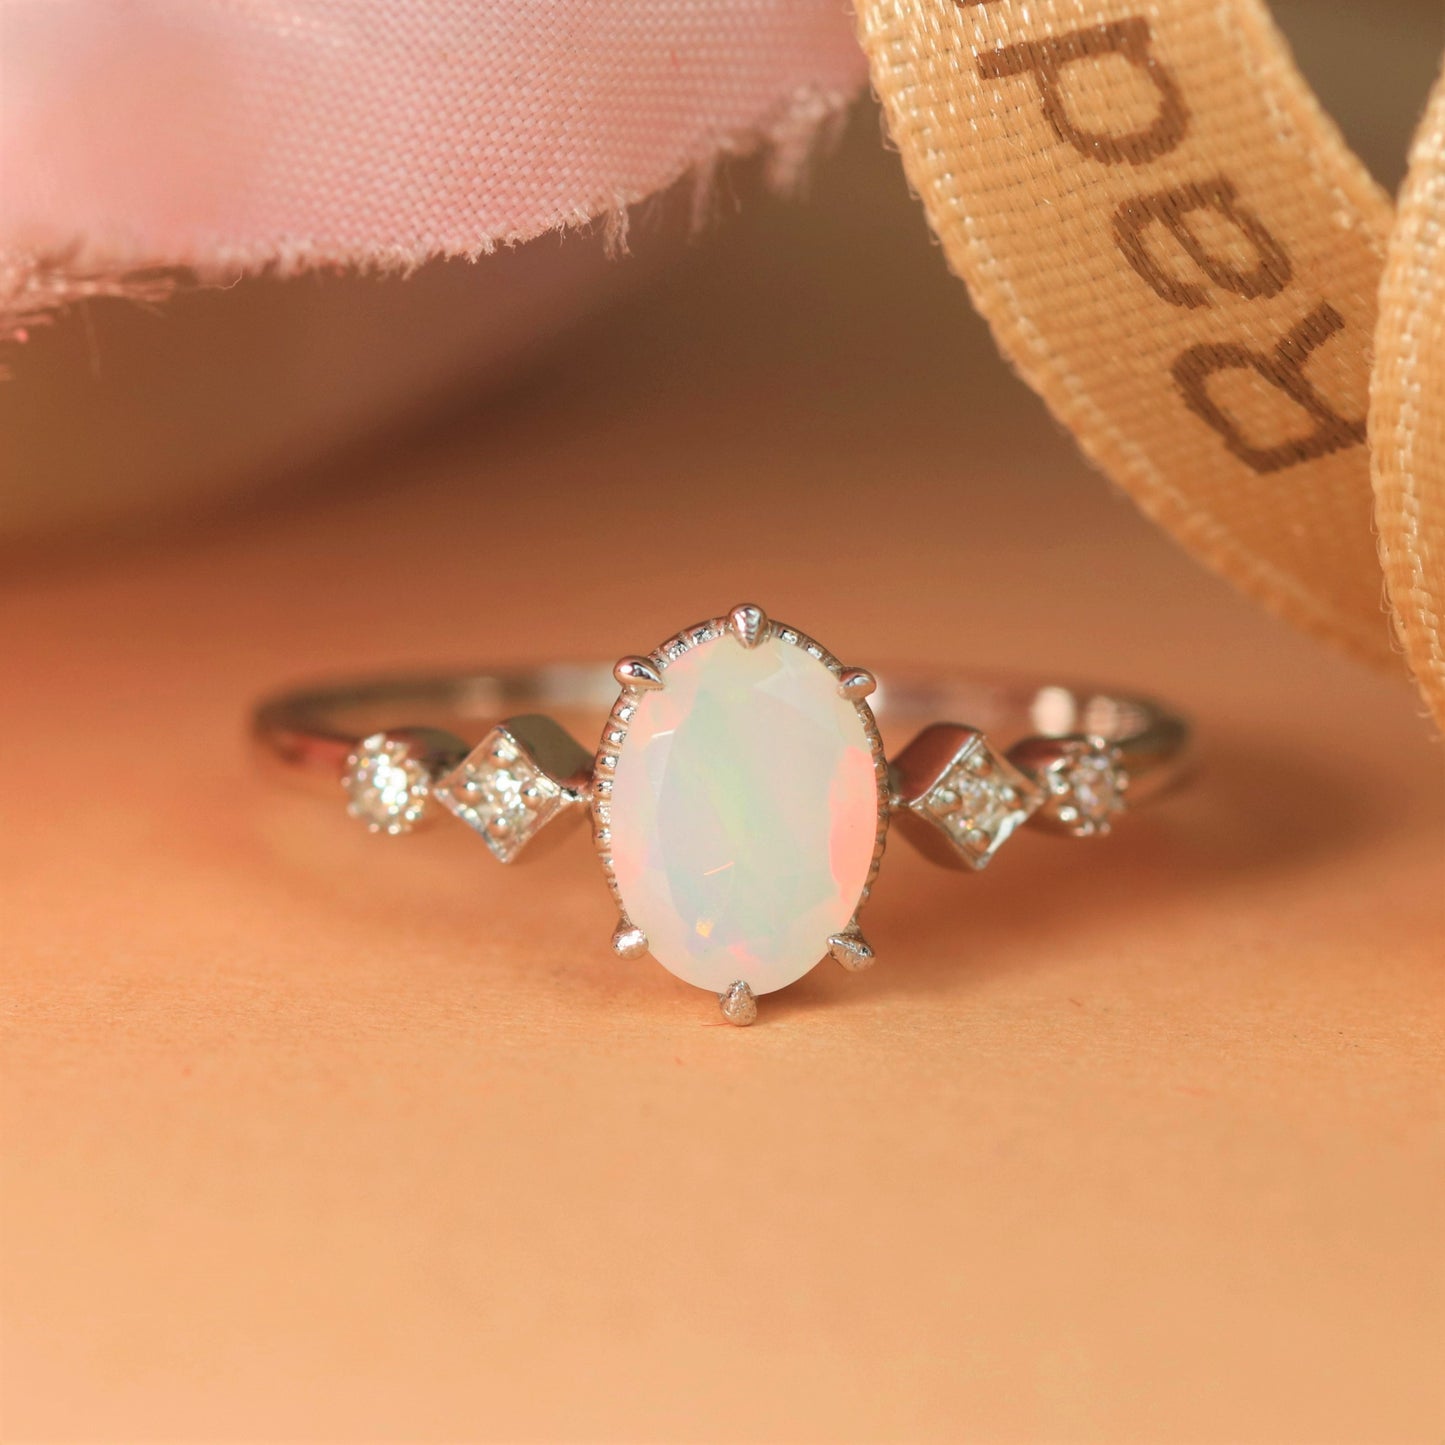 Square and Dot 1 Carat Oval Cut Opal Milgrain Bezel Wedding Engagement Ring with Diamonds in Gold on Sale